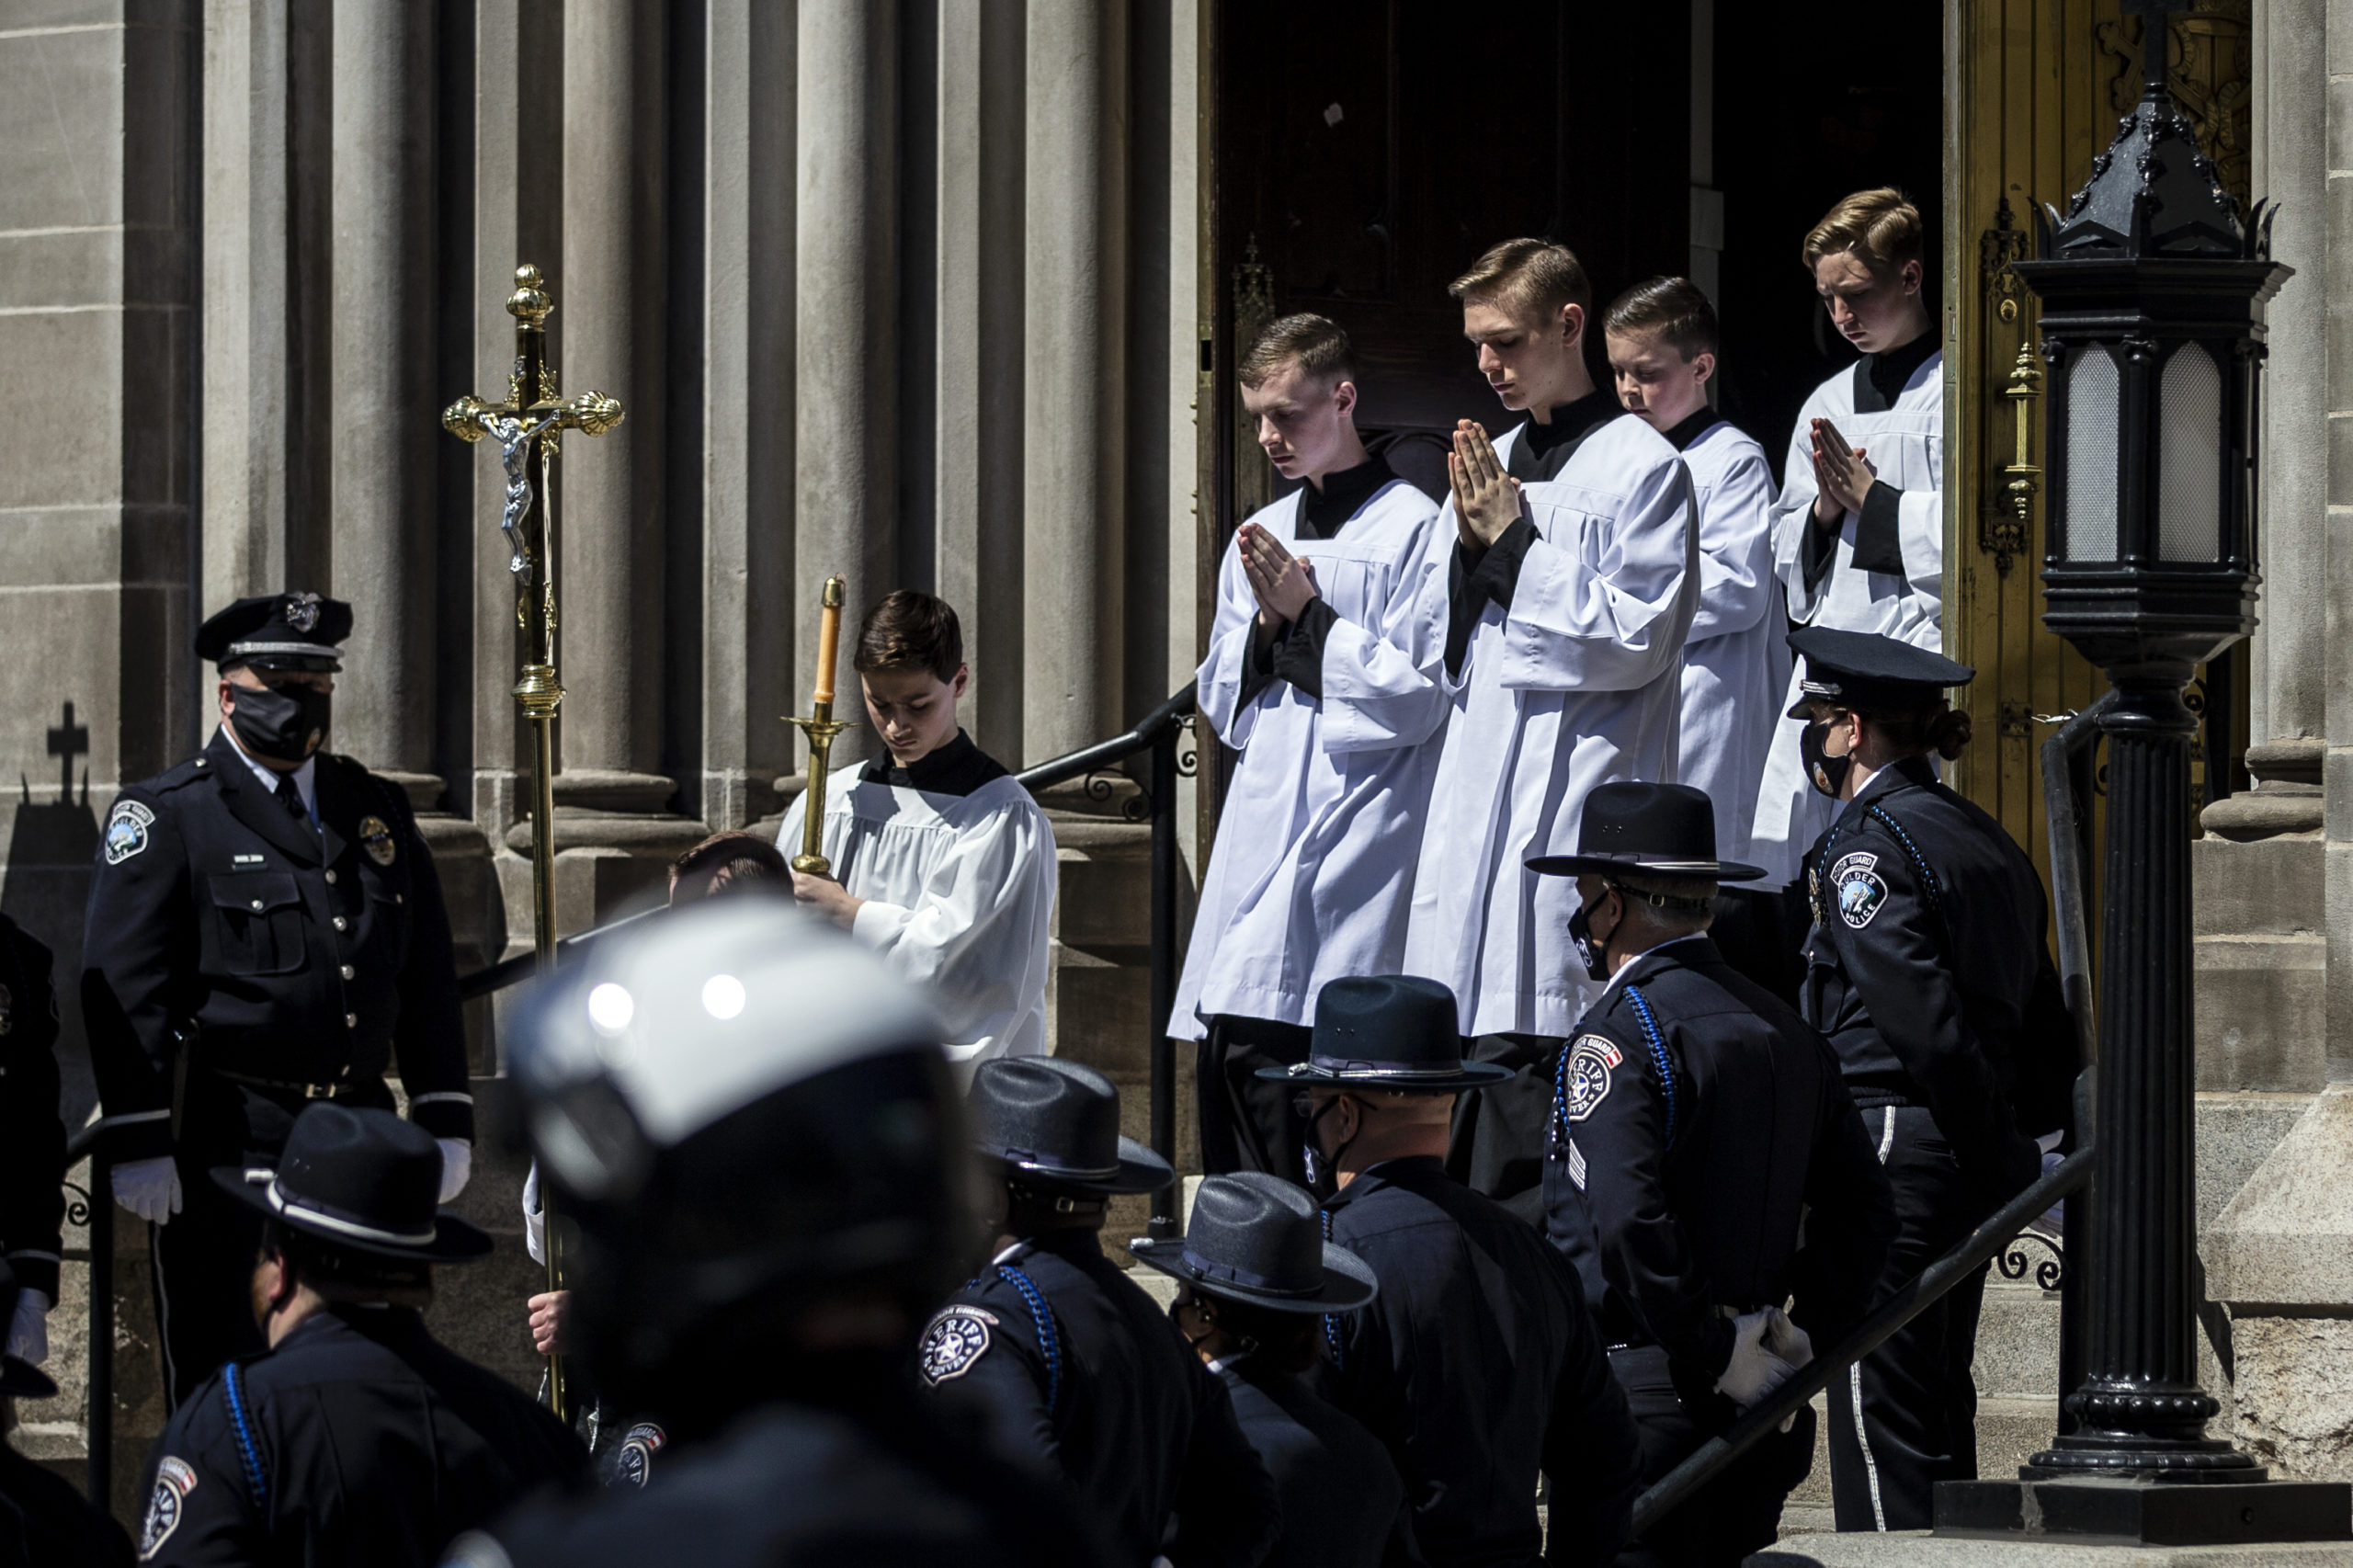 A procession makes its way out of The Cathedral Basilica of the Immaculate Conception during a Funeral Mass for slain Boulder Police officer Eric Talley on March 29, 2021 in Denver, Colorado. (Photo by Chet Strange/Getty Images)